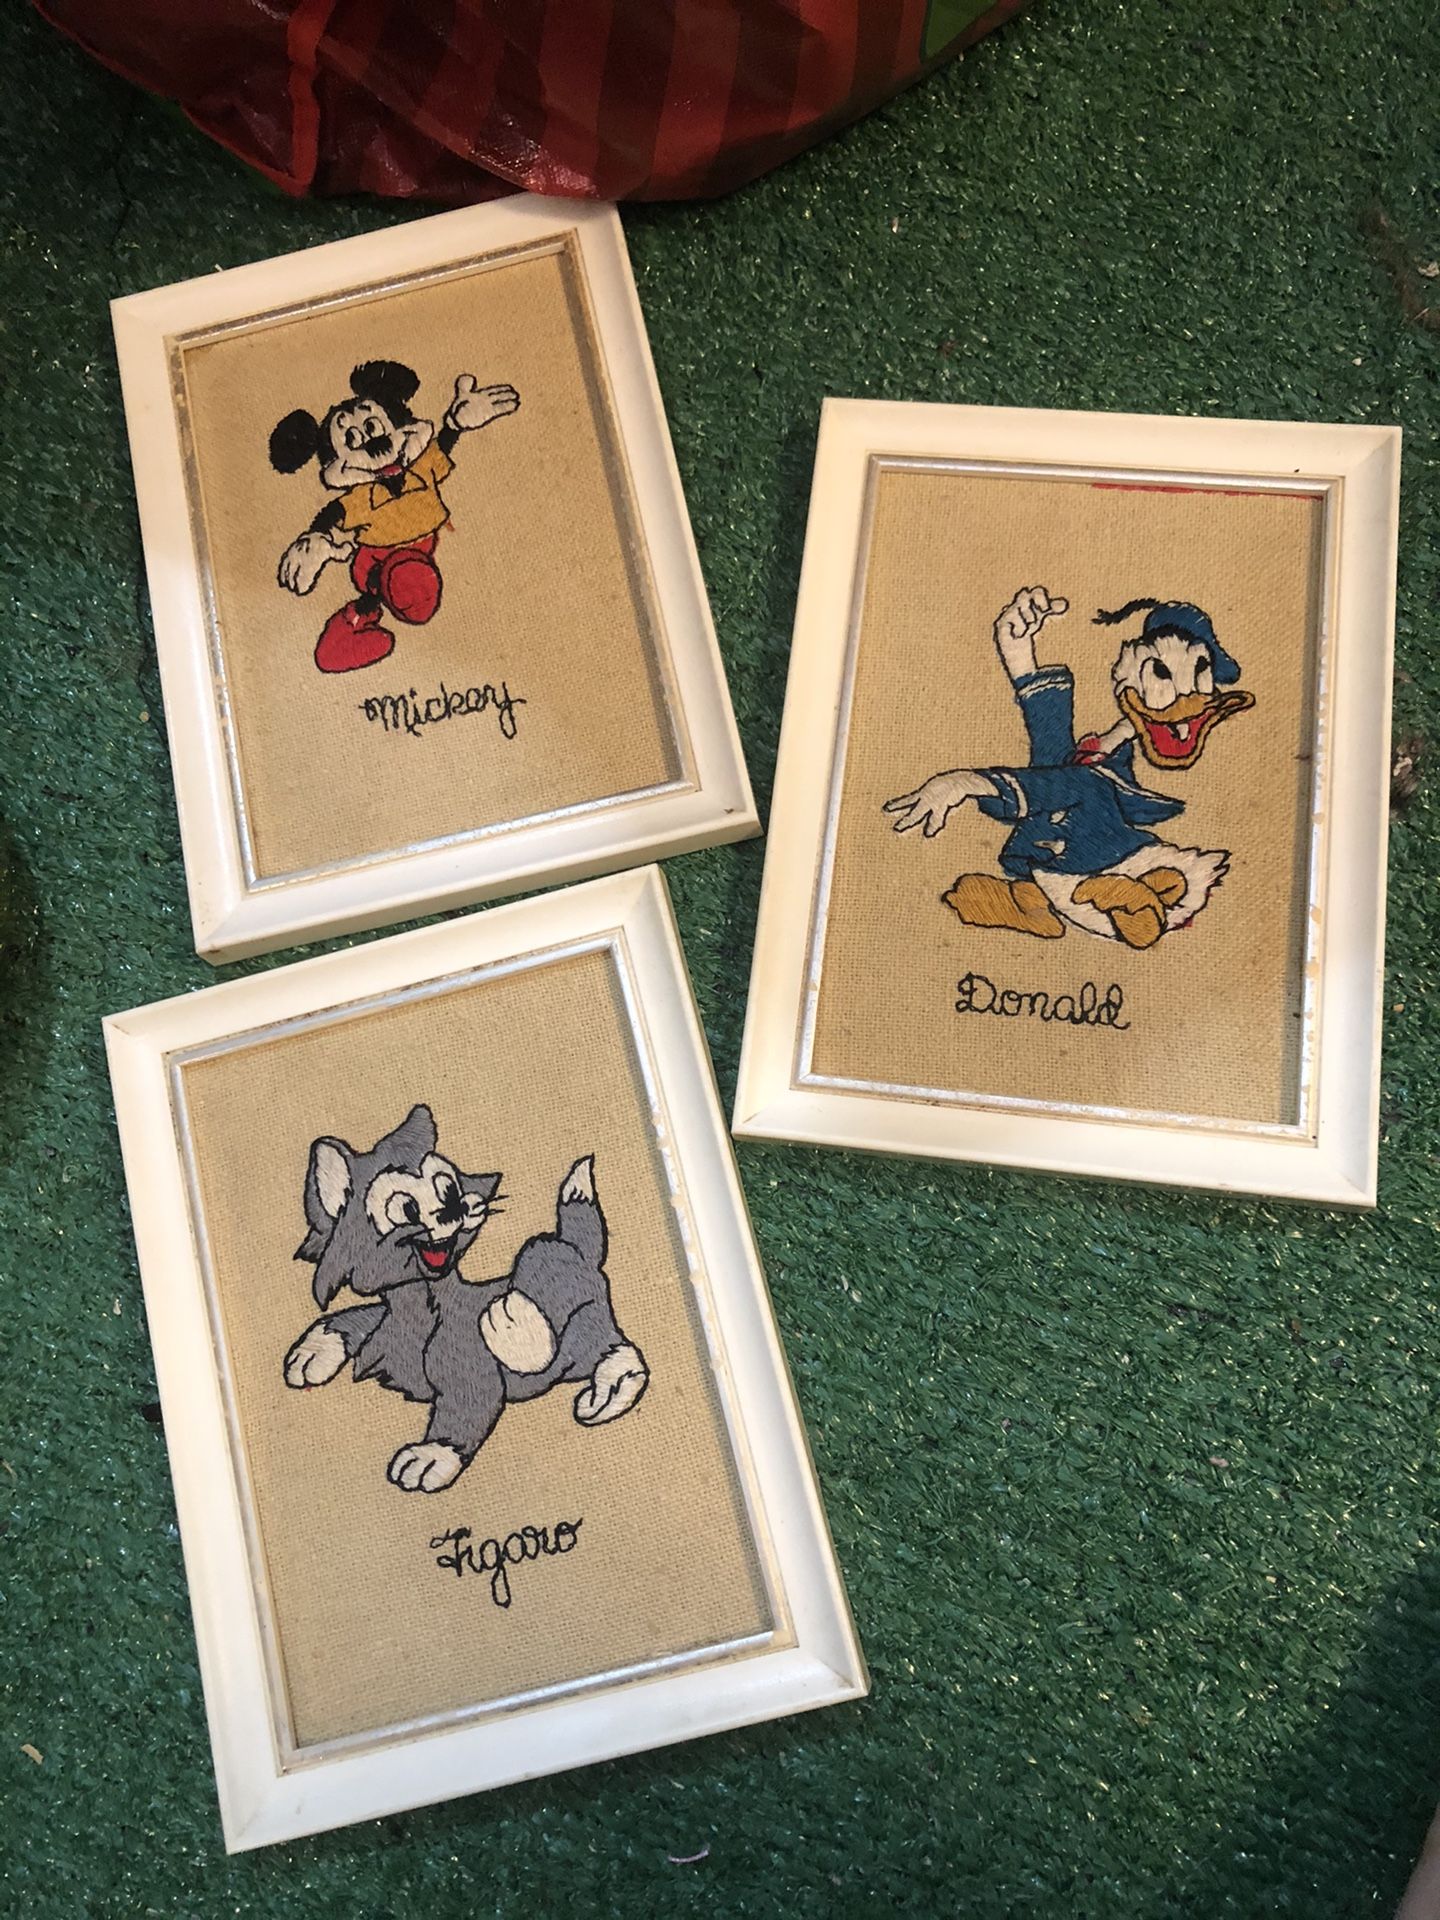 Disney Movie Character Embroidered Framed Pictures